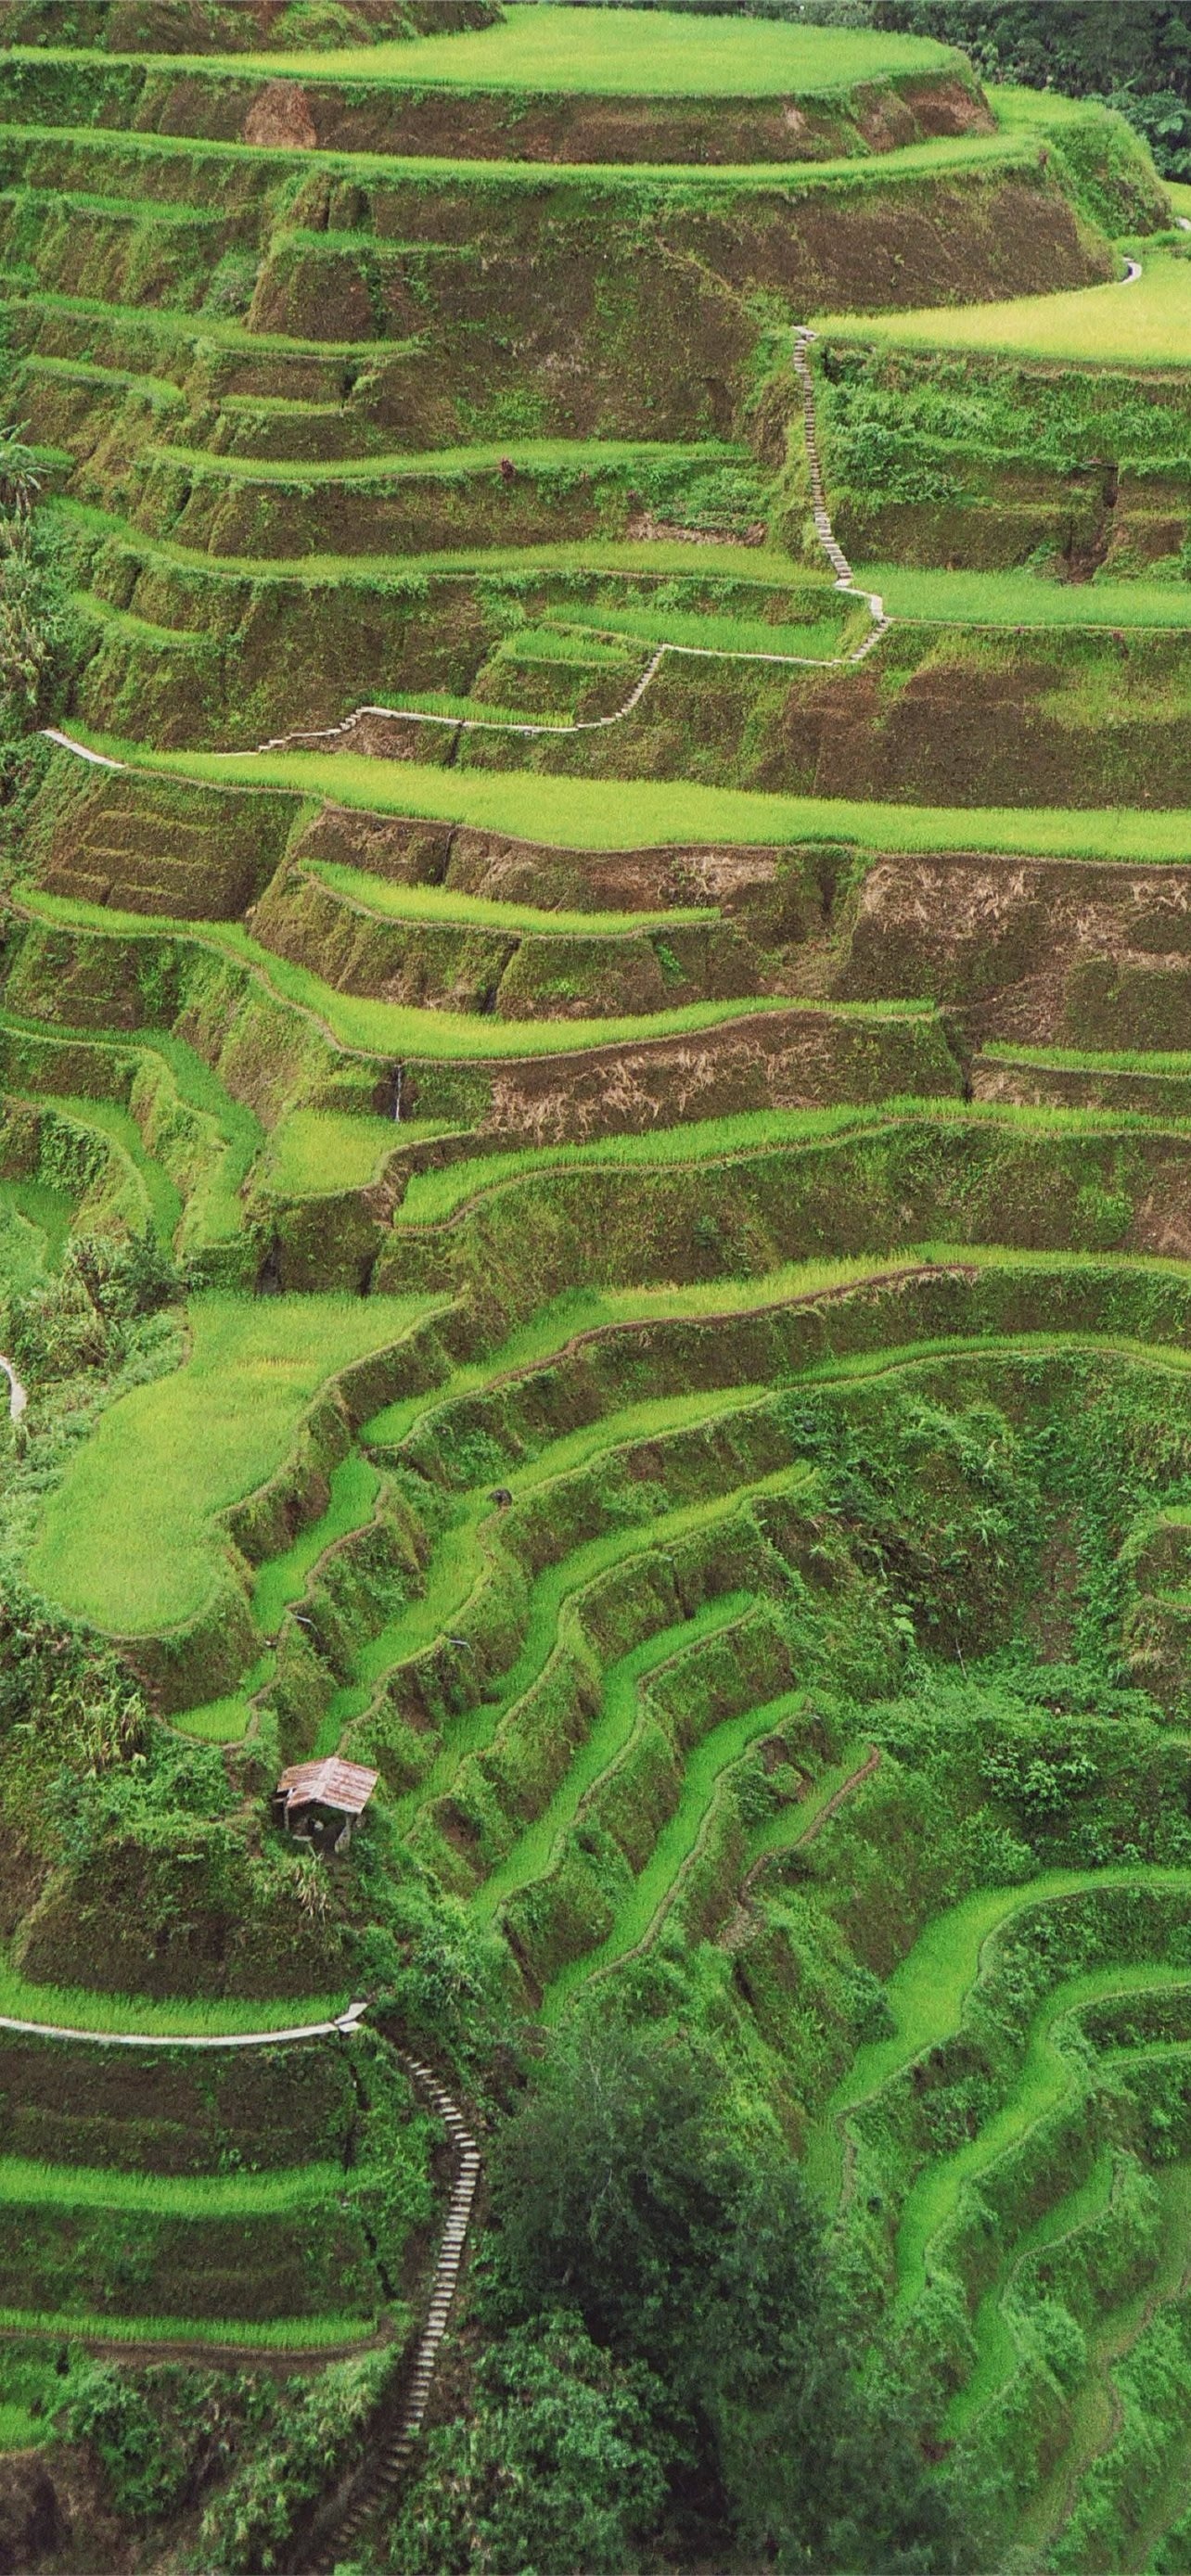 Banaue wallpapers, iPhone compatible, Free download, Stunning background, 1290x2780 HD Phone